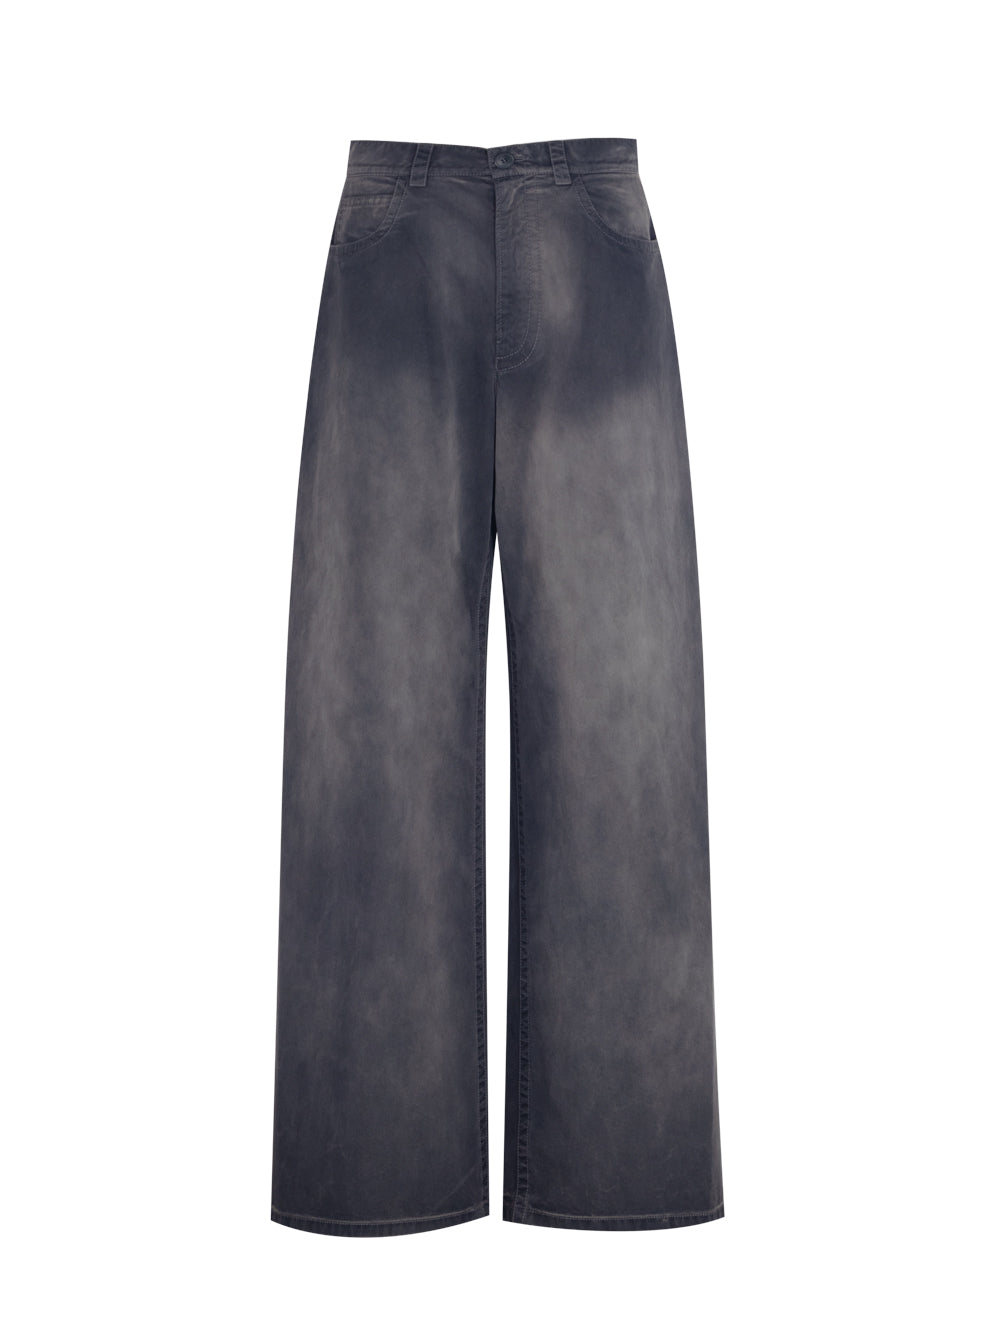 Five Pocket Pant Without Side Seam Washed Black Pearl